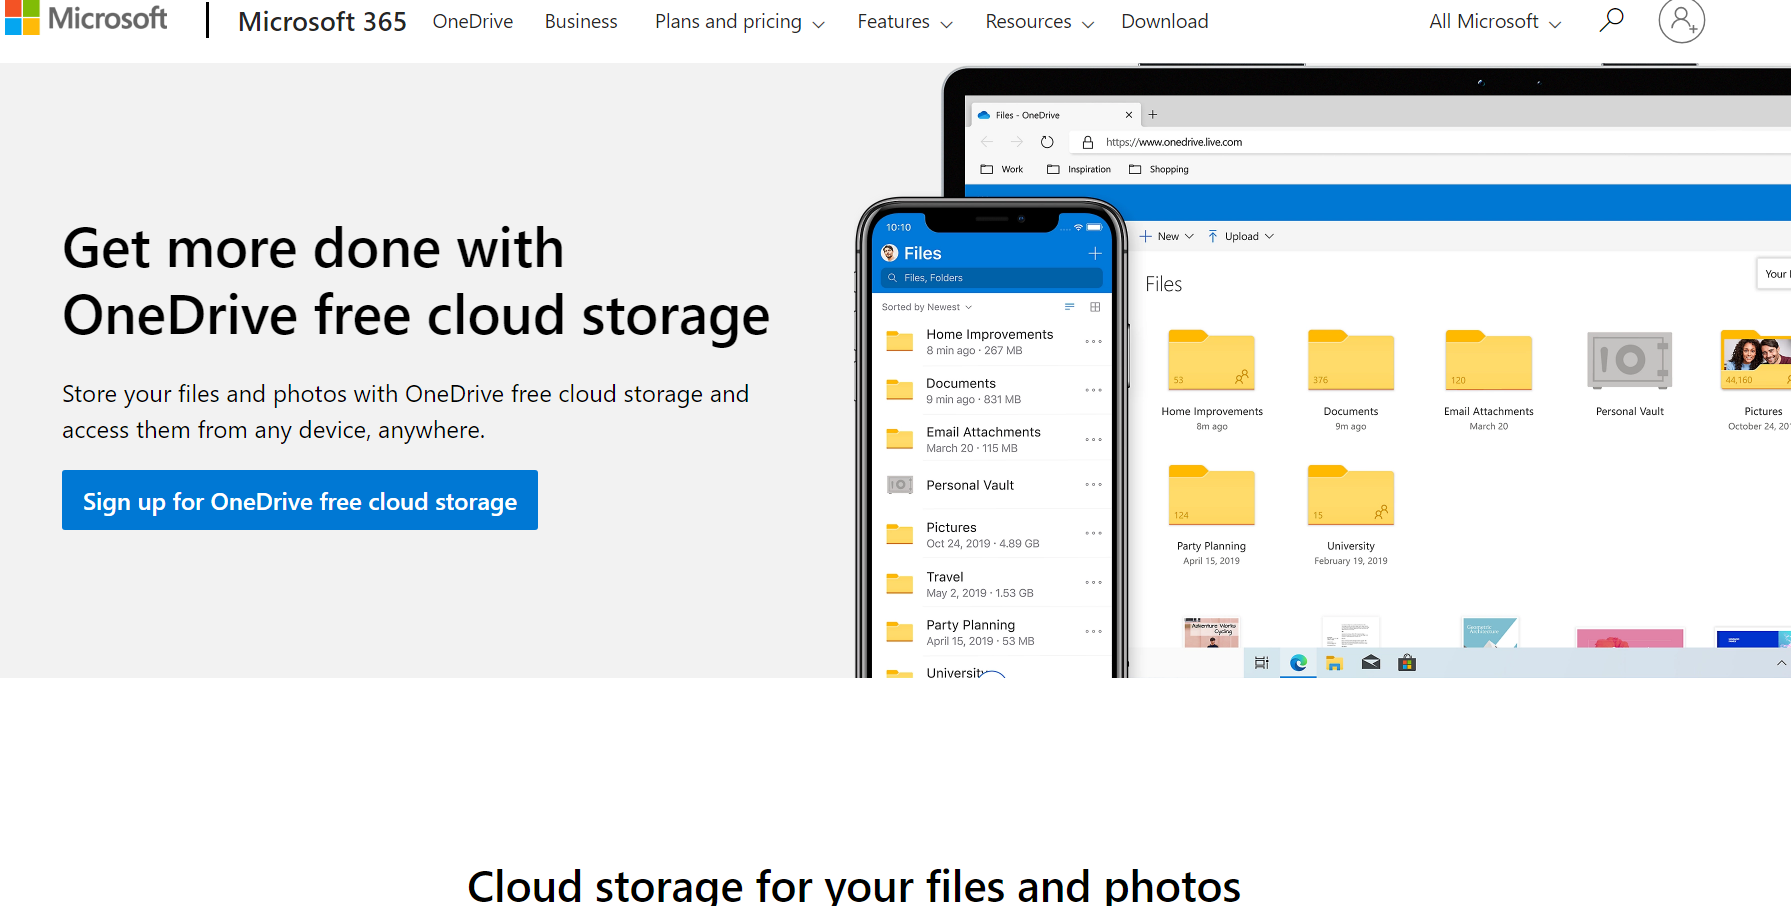 One Drive cloud storage solution